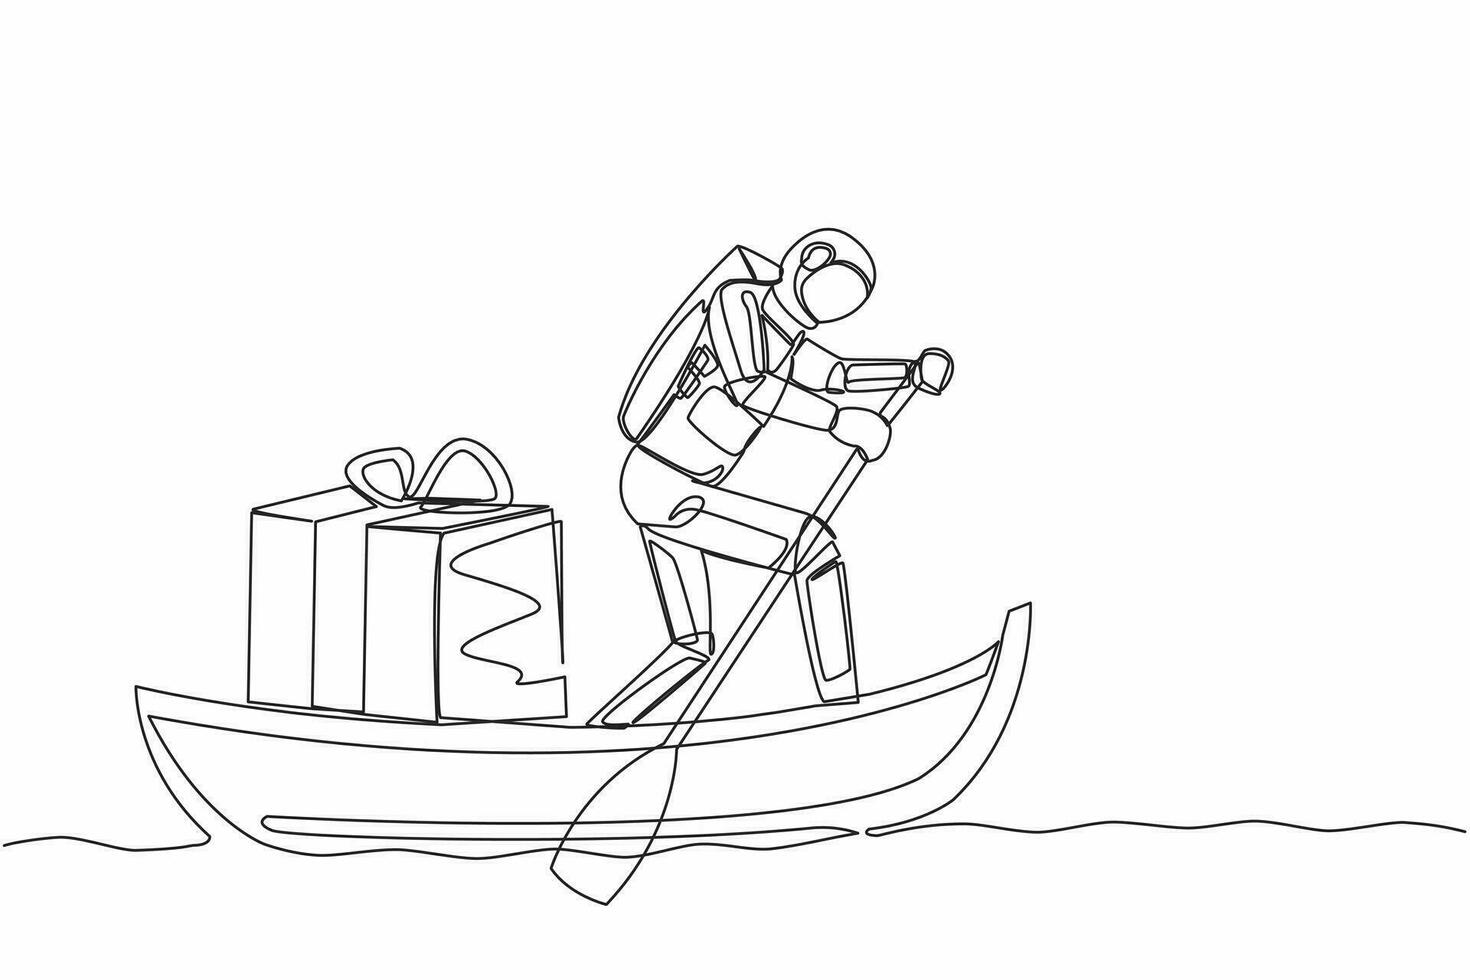 Single continuous line drawing astronaut sailing away on boat with gift box. Prizes for cosmonauts who have successfully explored outer space. Cosmonaut deep space. One line design vector illustration